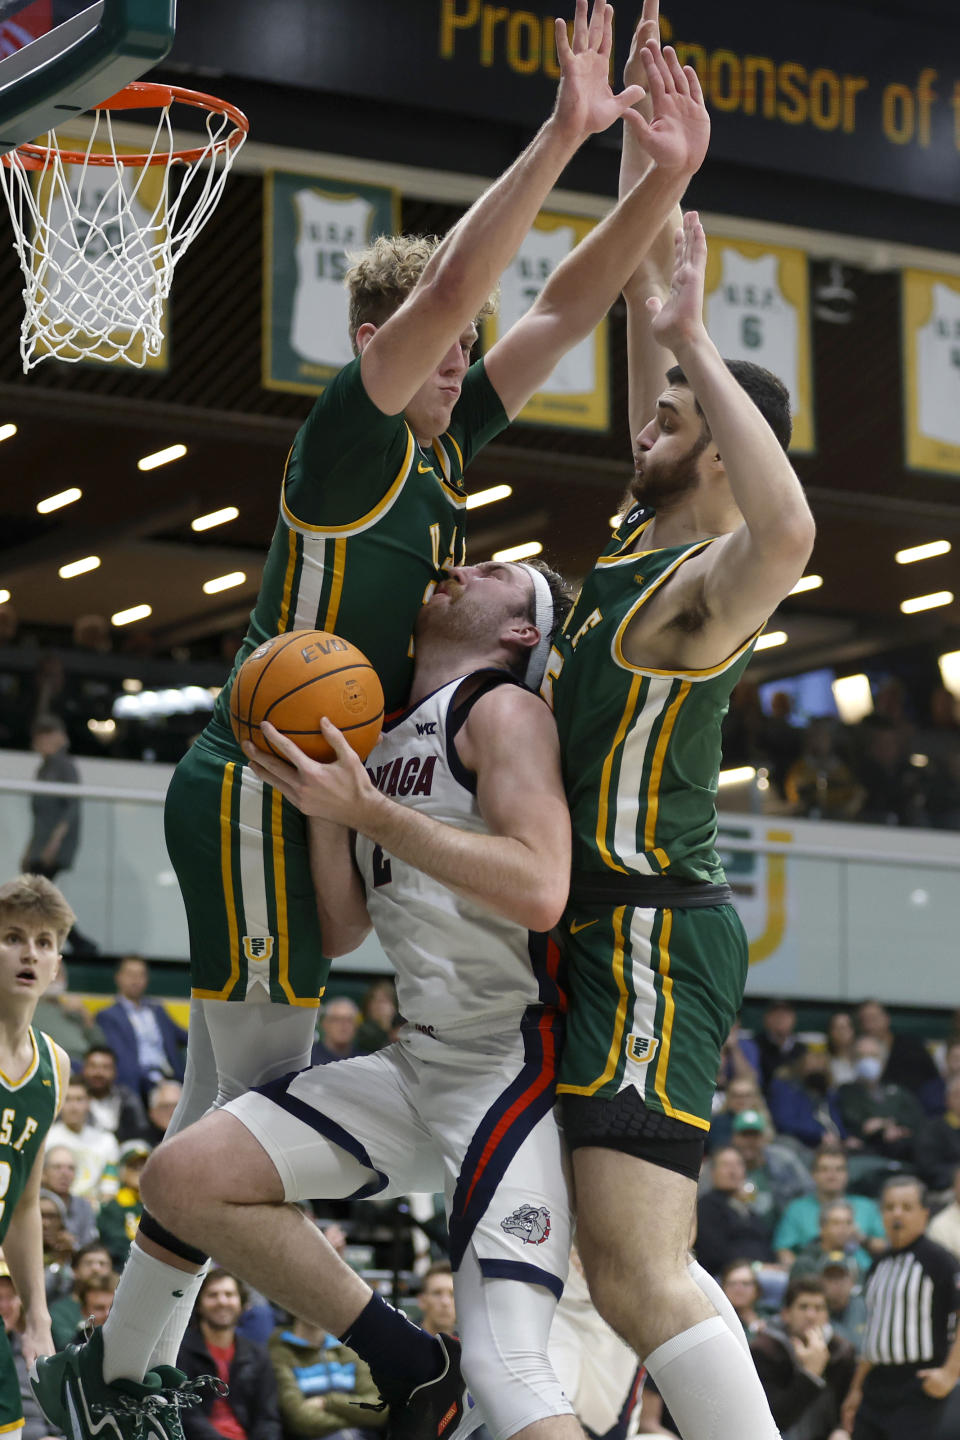 Gonzaga forward Drew Timme, center, shoots from between San Francisco forward Zane Meeks, left, and center Saba Gigiberia during the first half of an NCAA college basketball game in San Francisco, Thursday, Jan. 5, 2023. (AP Photo/Jed Jacobsohn)